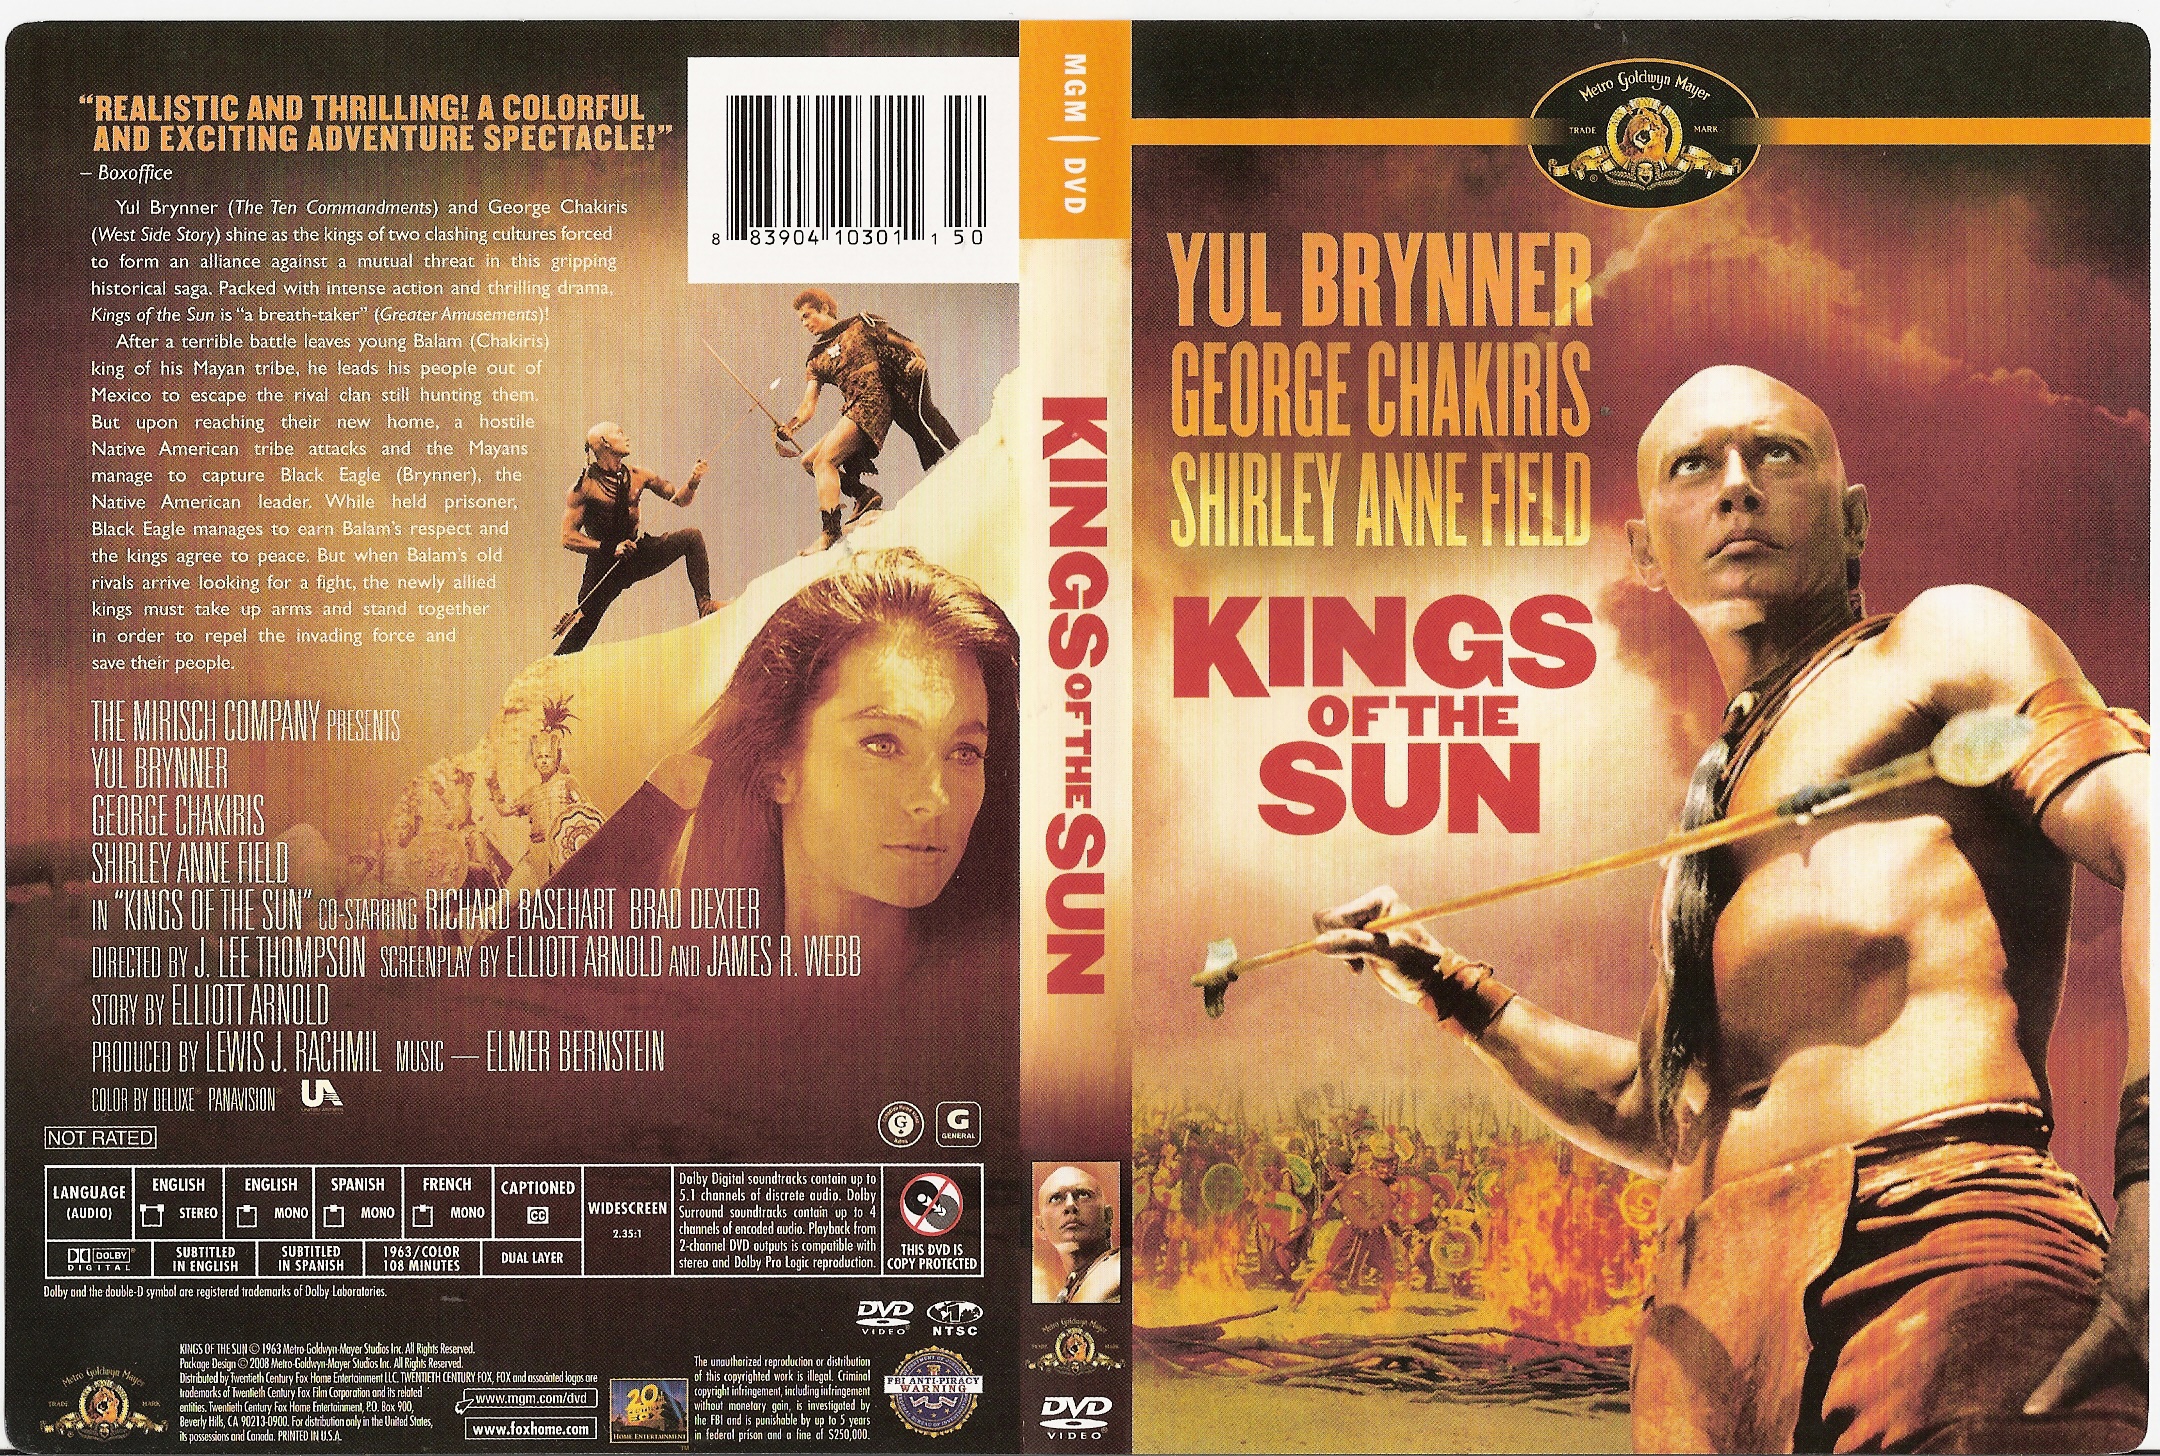 Jaquette DVD Kings of the sun Zone 1